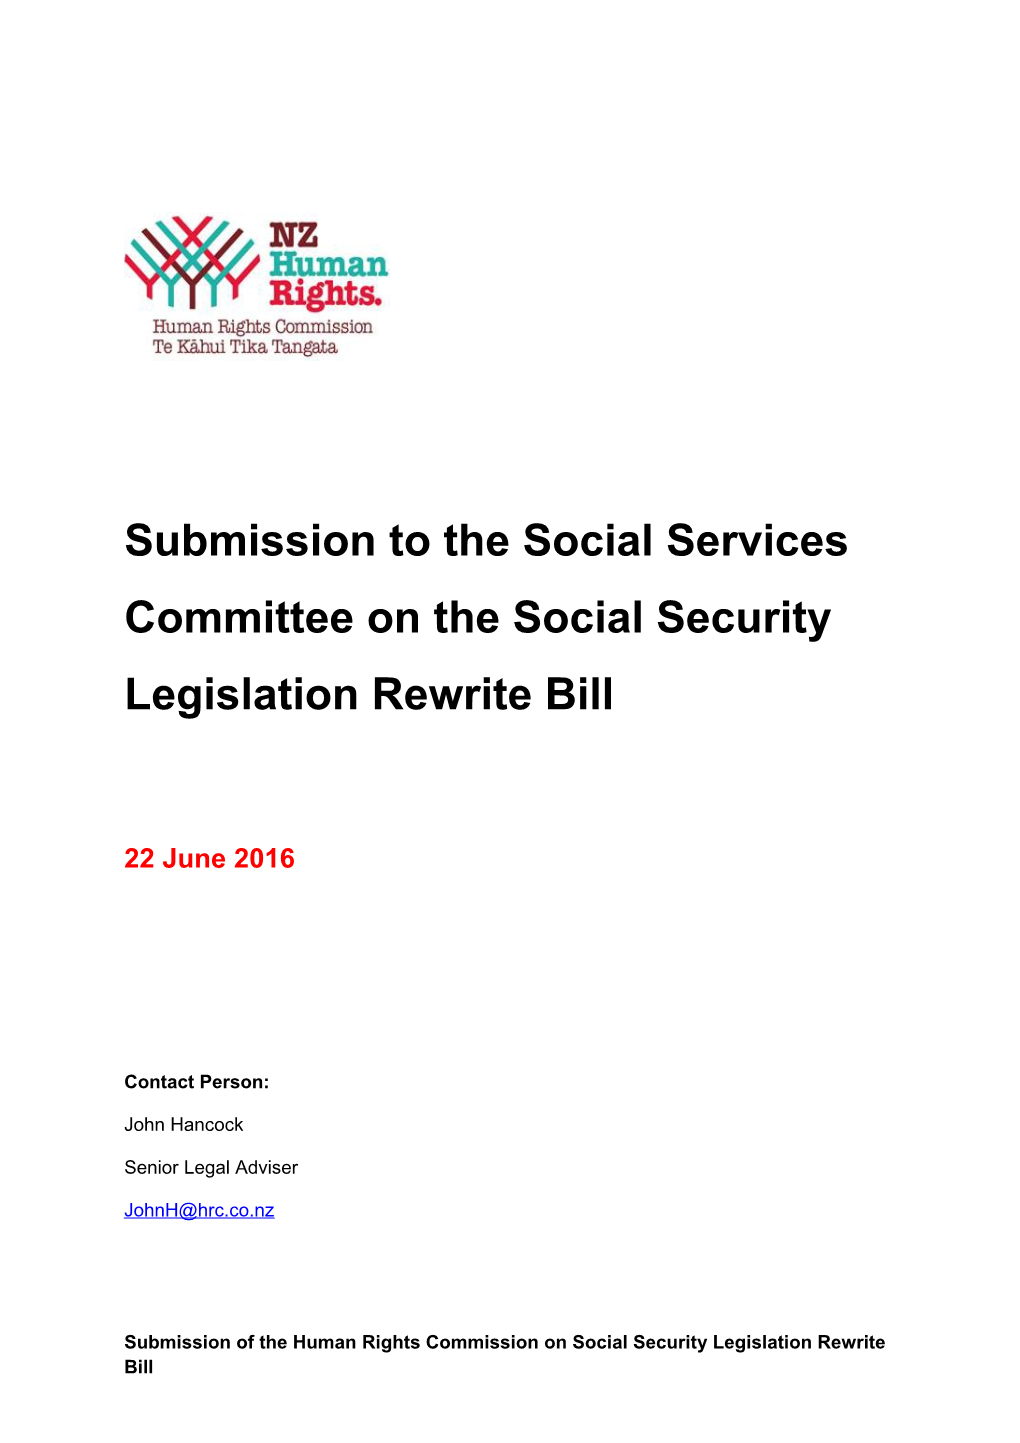 Submission to the Social Services Committee on the Social Security Legislation Rewrite Bill